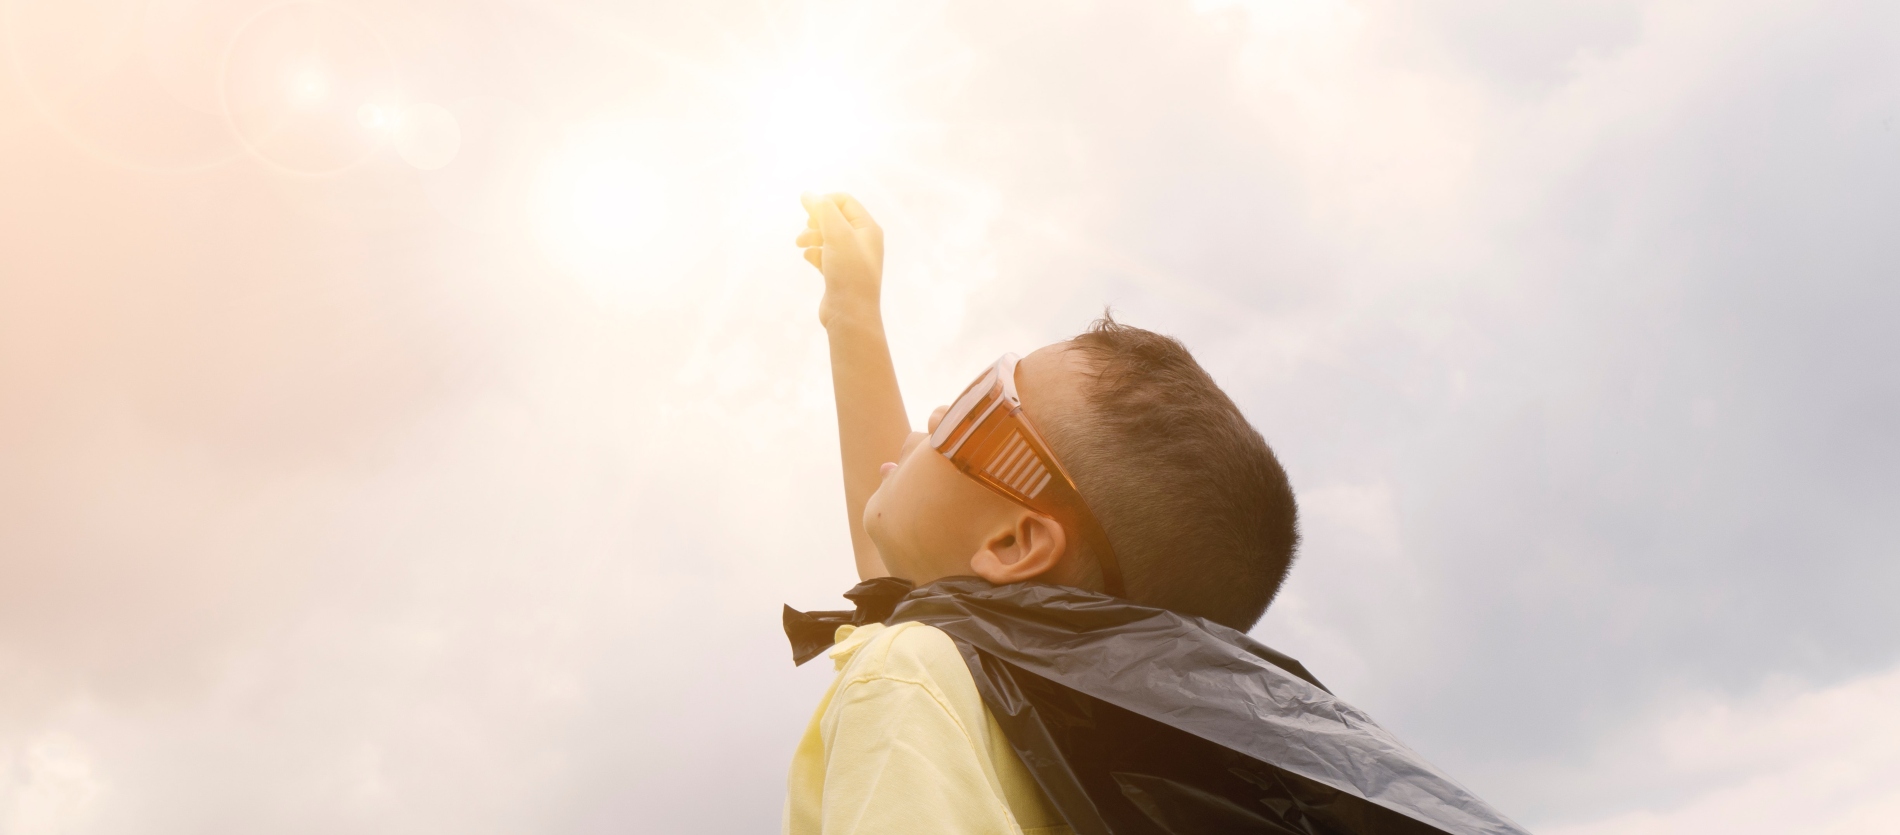 Young boy wearing sunglasses and a black cape stretching his right arm up towards the sun